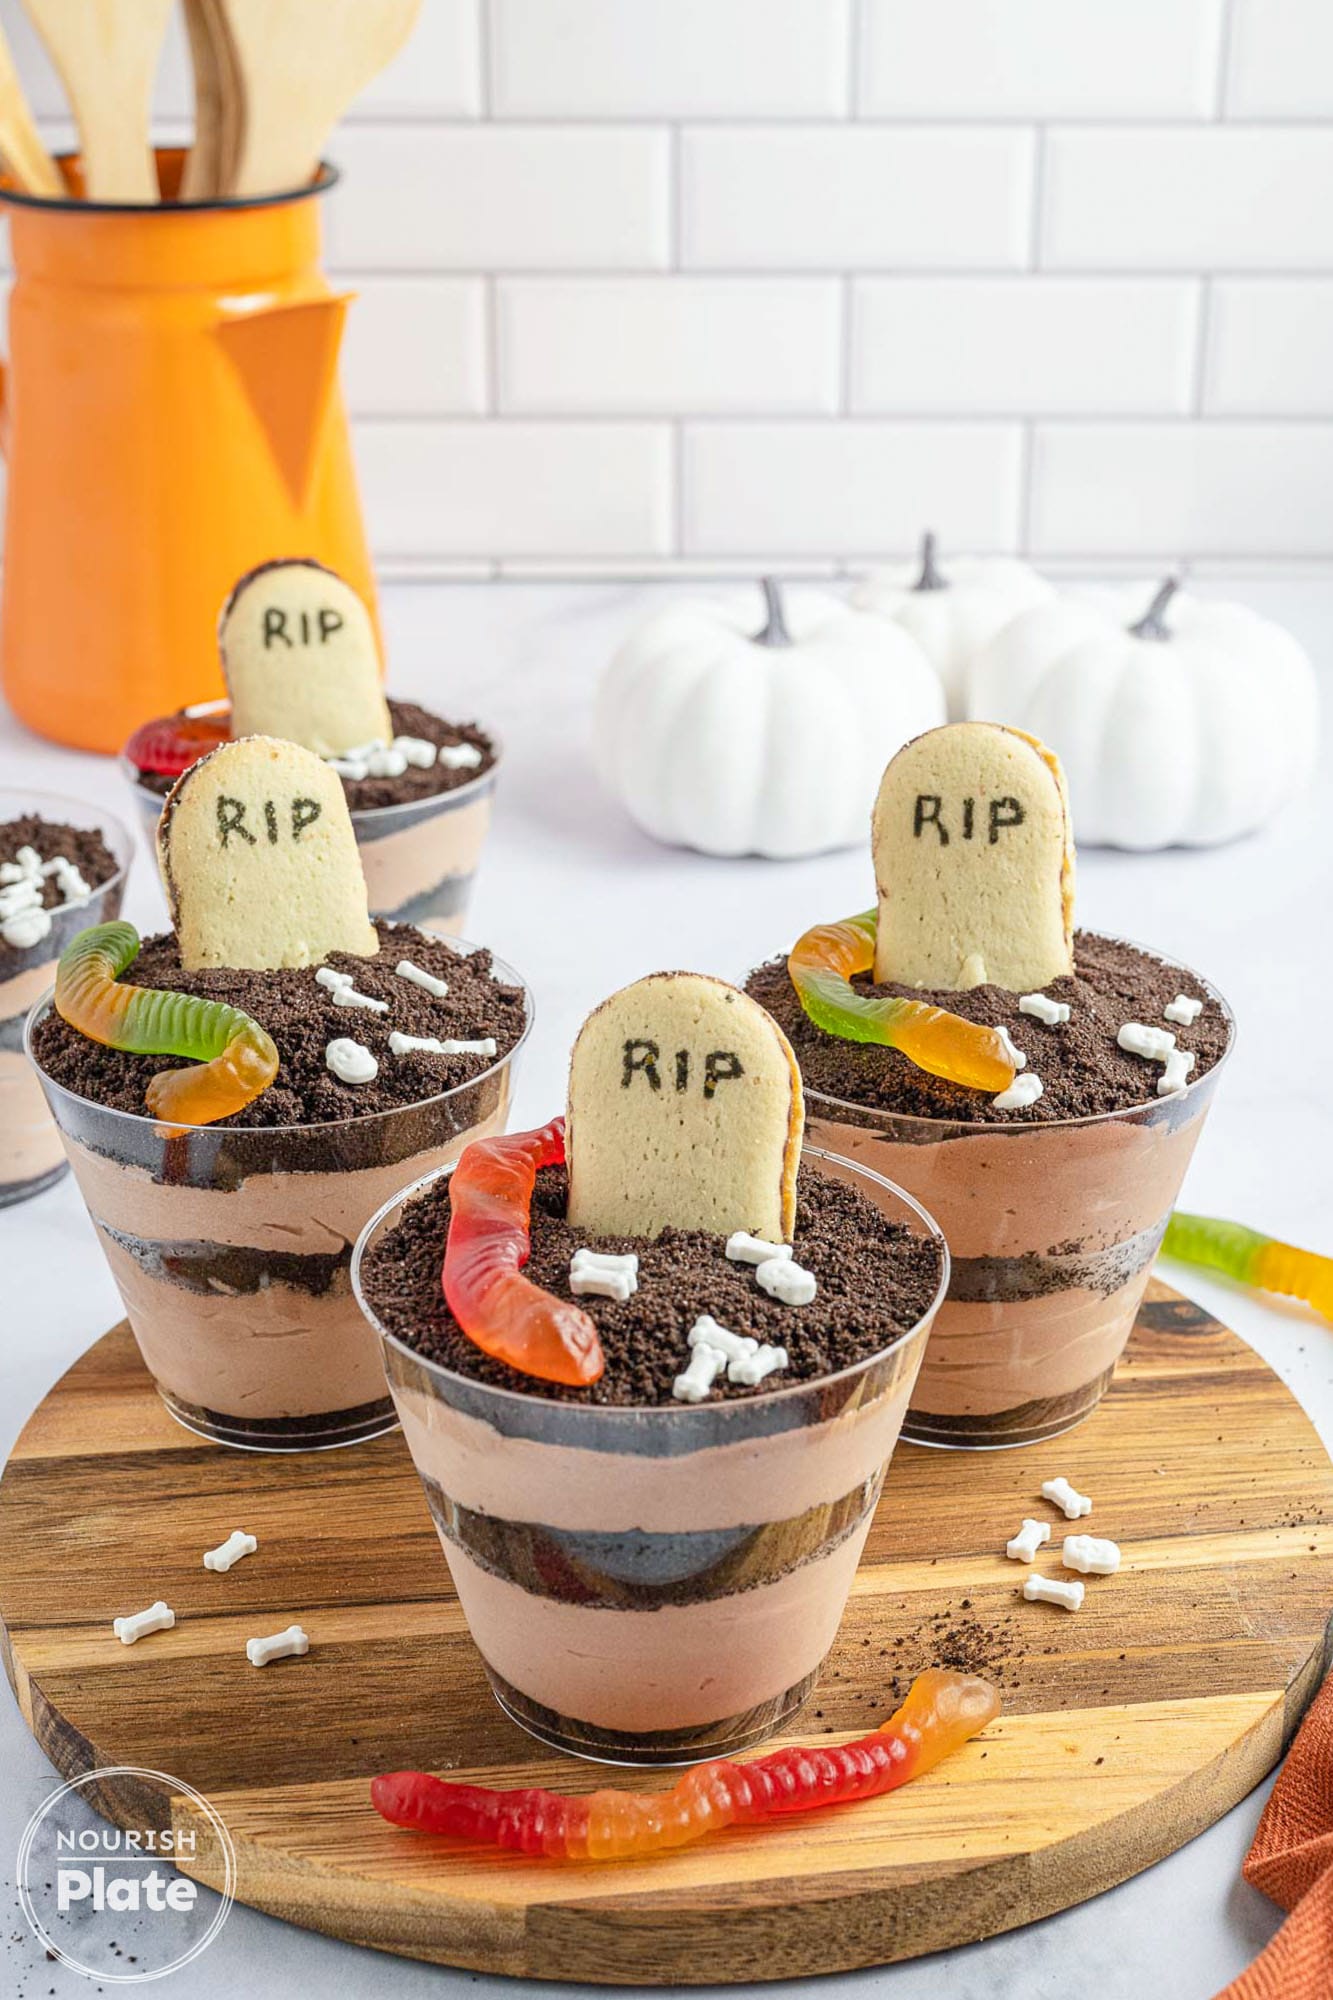 3 dirt cups on a wooden tray, decorated for halloween